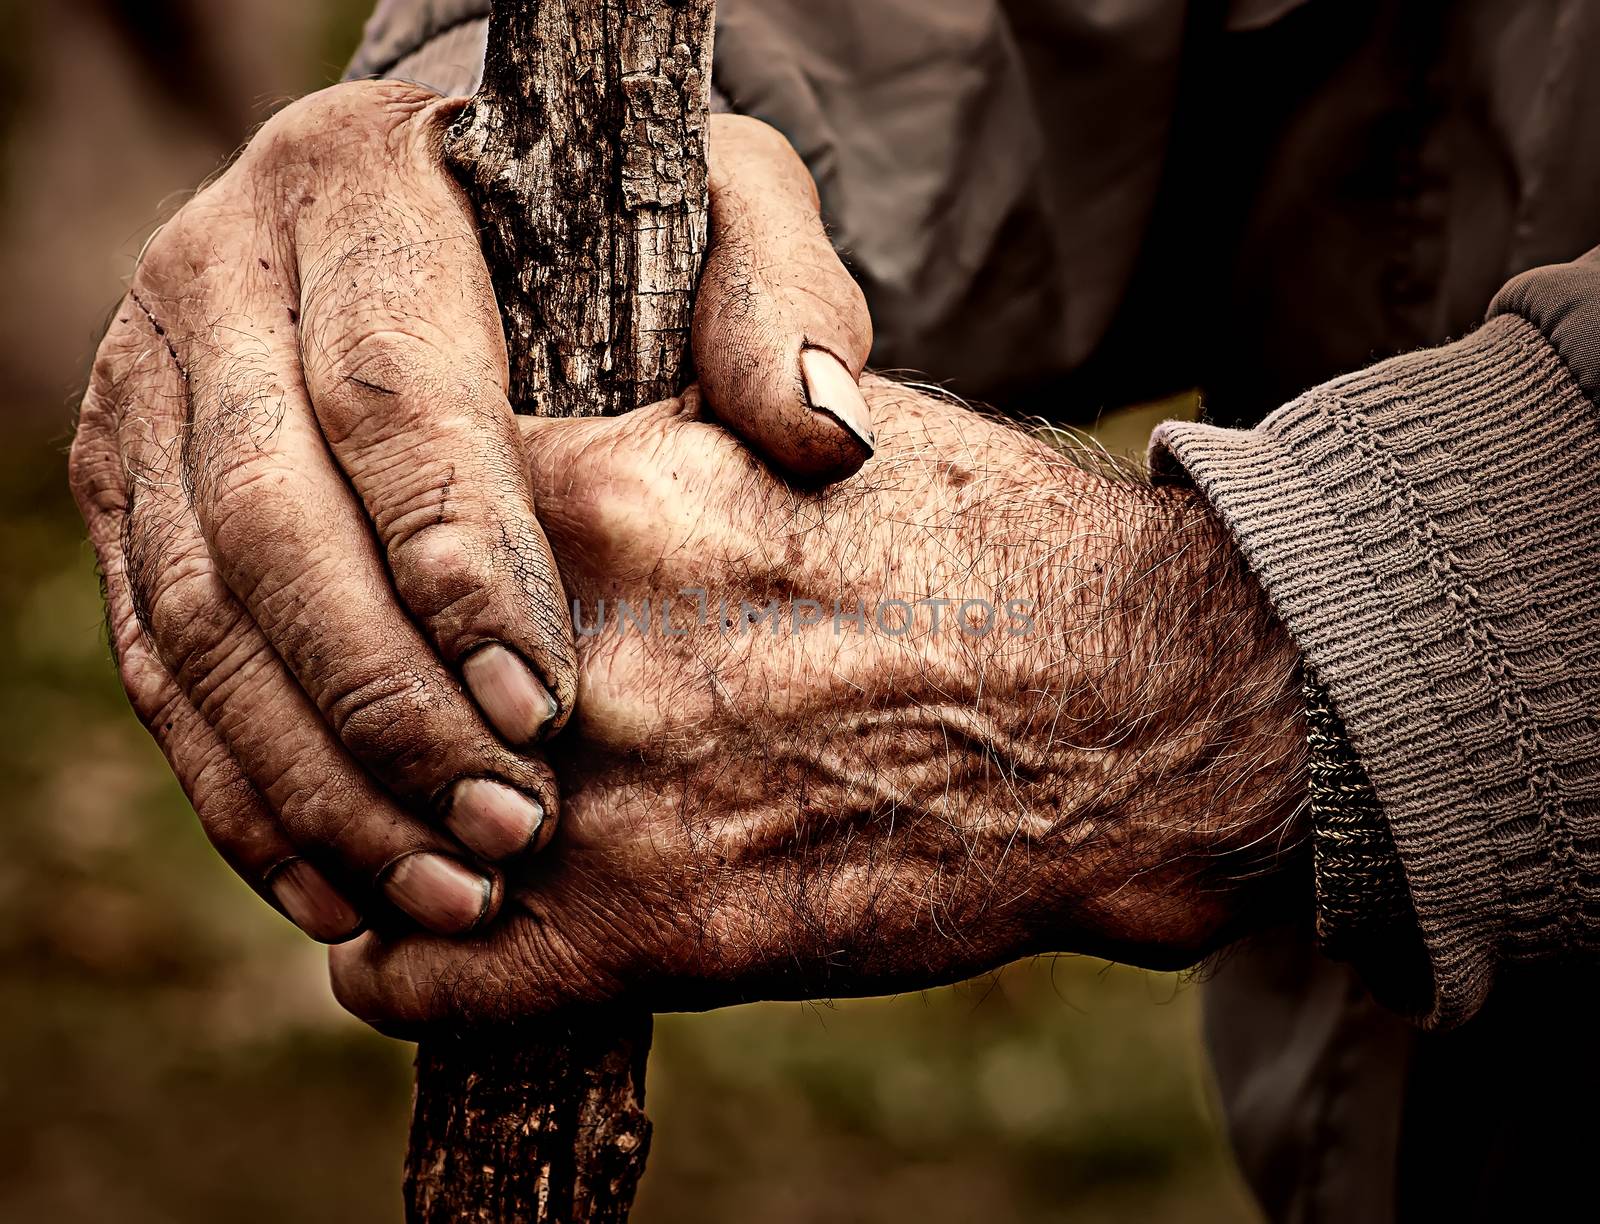 Dramatic photo of an elderly man holding a staff in his hands